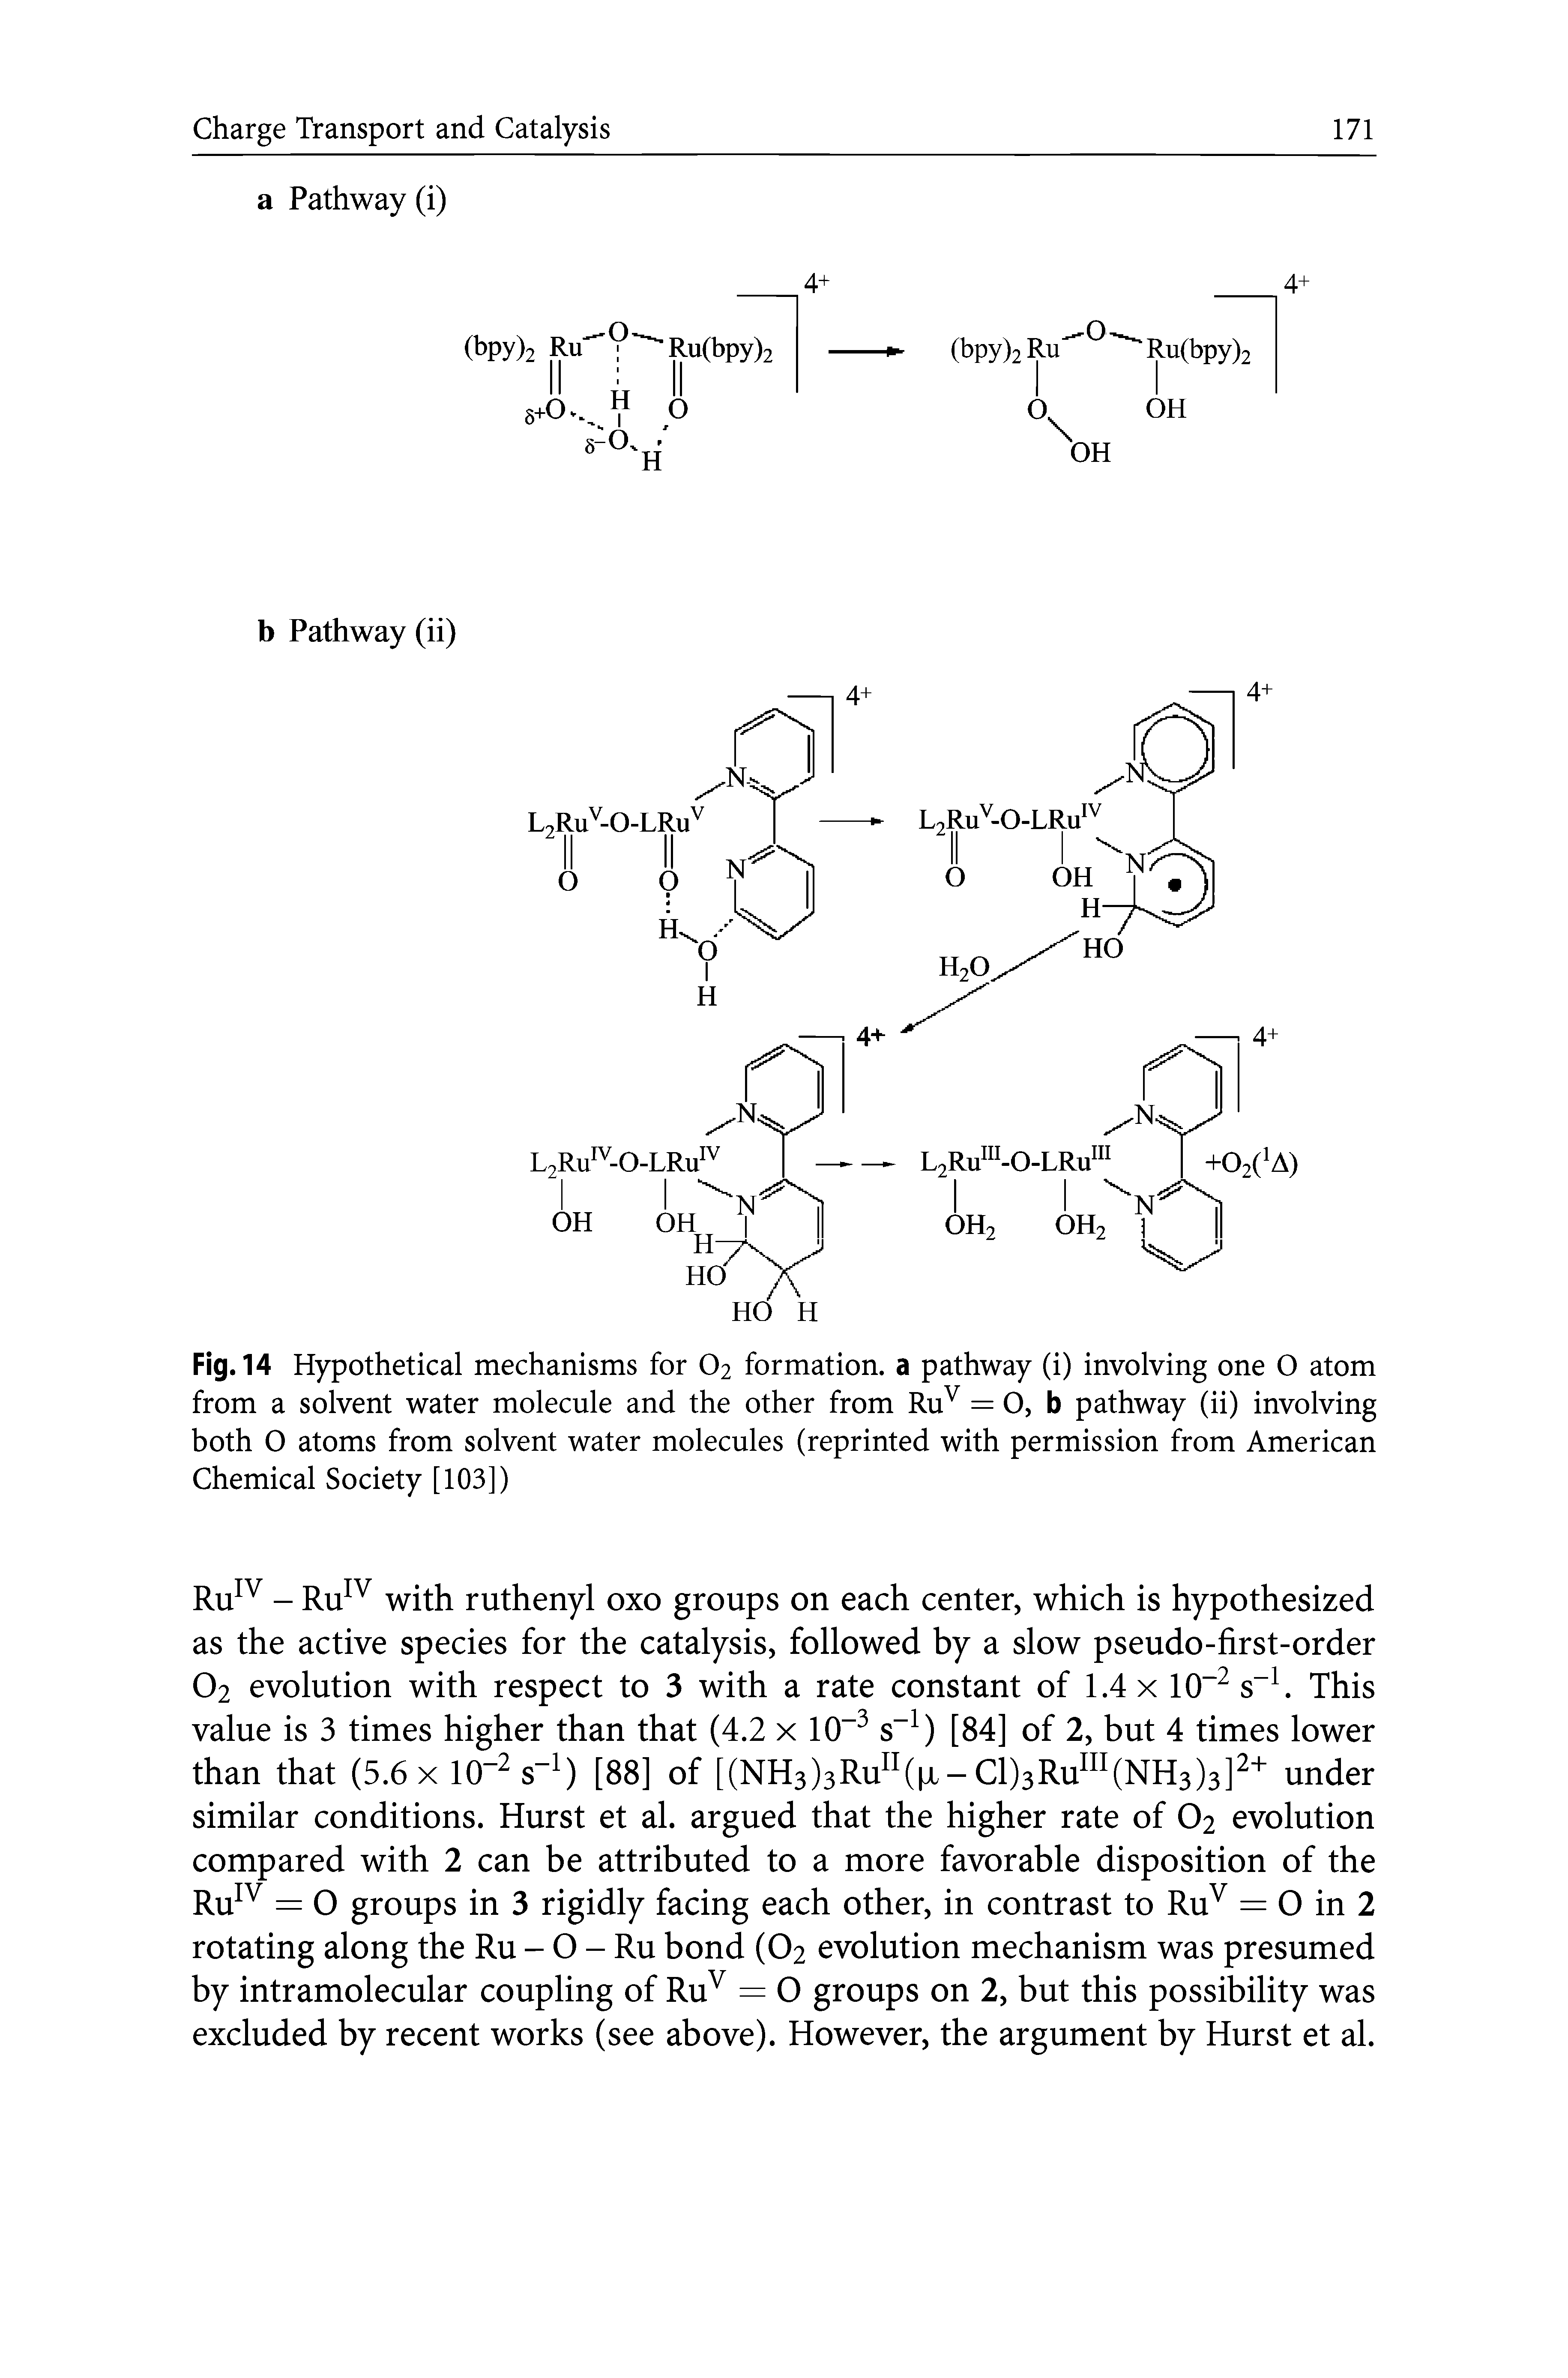 Fig. 14 Hypothetical mechanisms for O2 formation, a pathway (i) involving one O atom from a solvent water molecule and the other from Ru = O, b pathway (ii) involving both 0 atoms from solvent water molecules (reprinted with permission from American Chemical Society [103])...